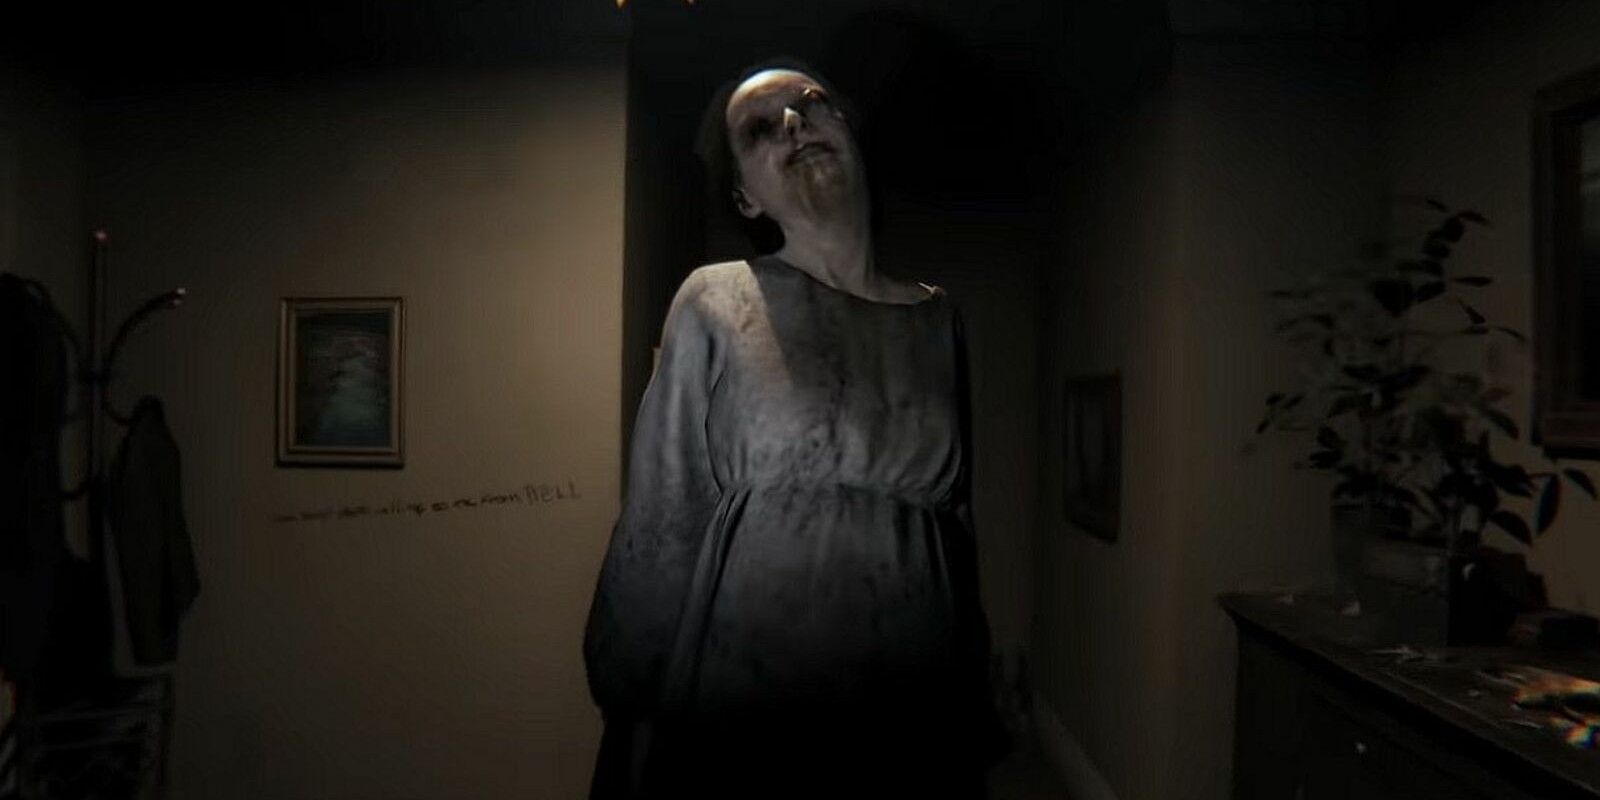 Leaked Silent Hill Images Come From P.T-Style Demo, Report Claims